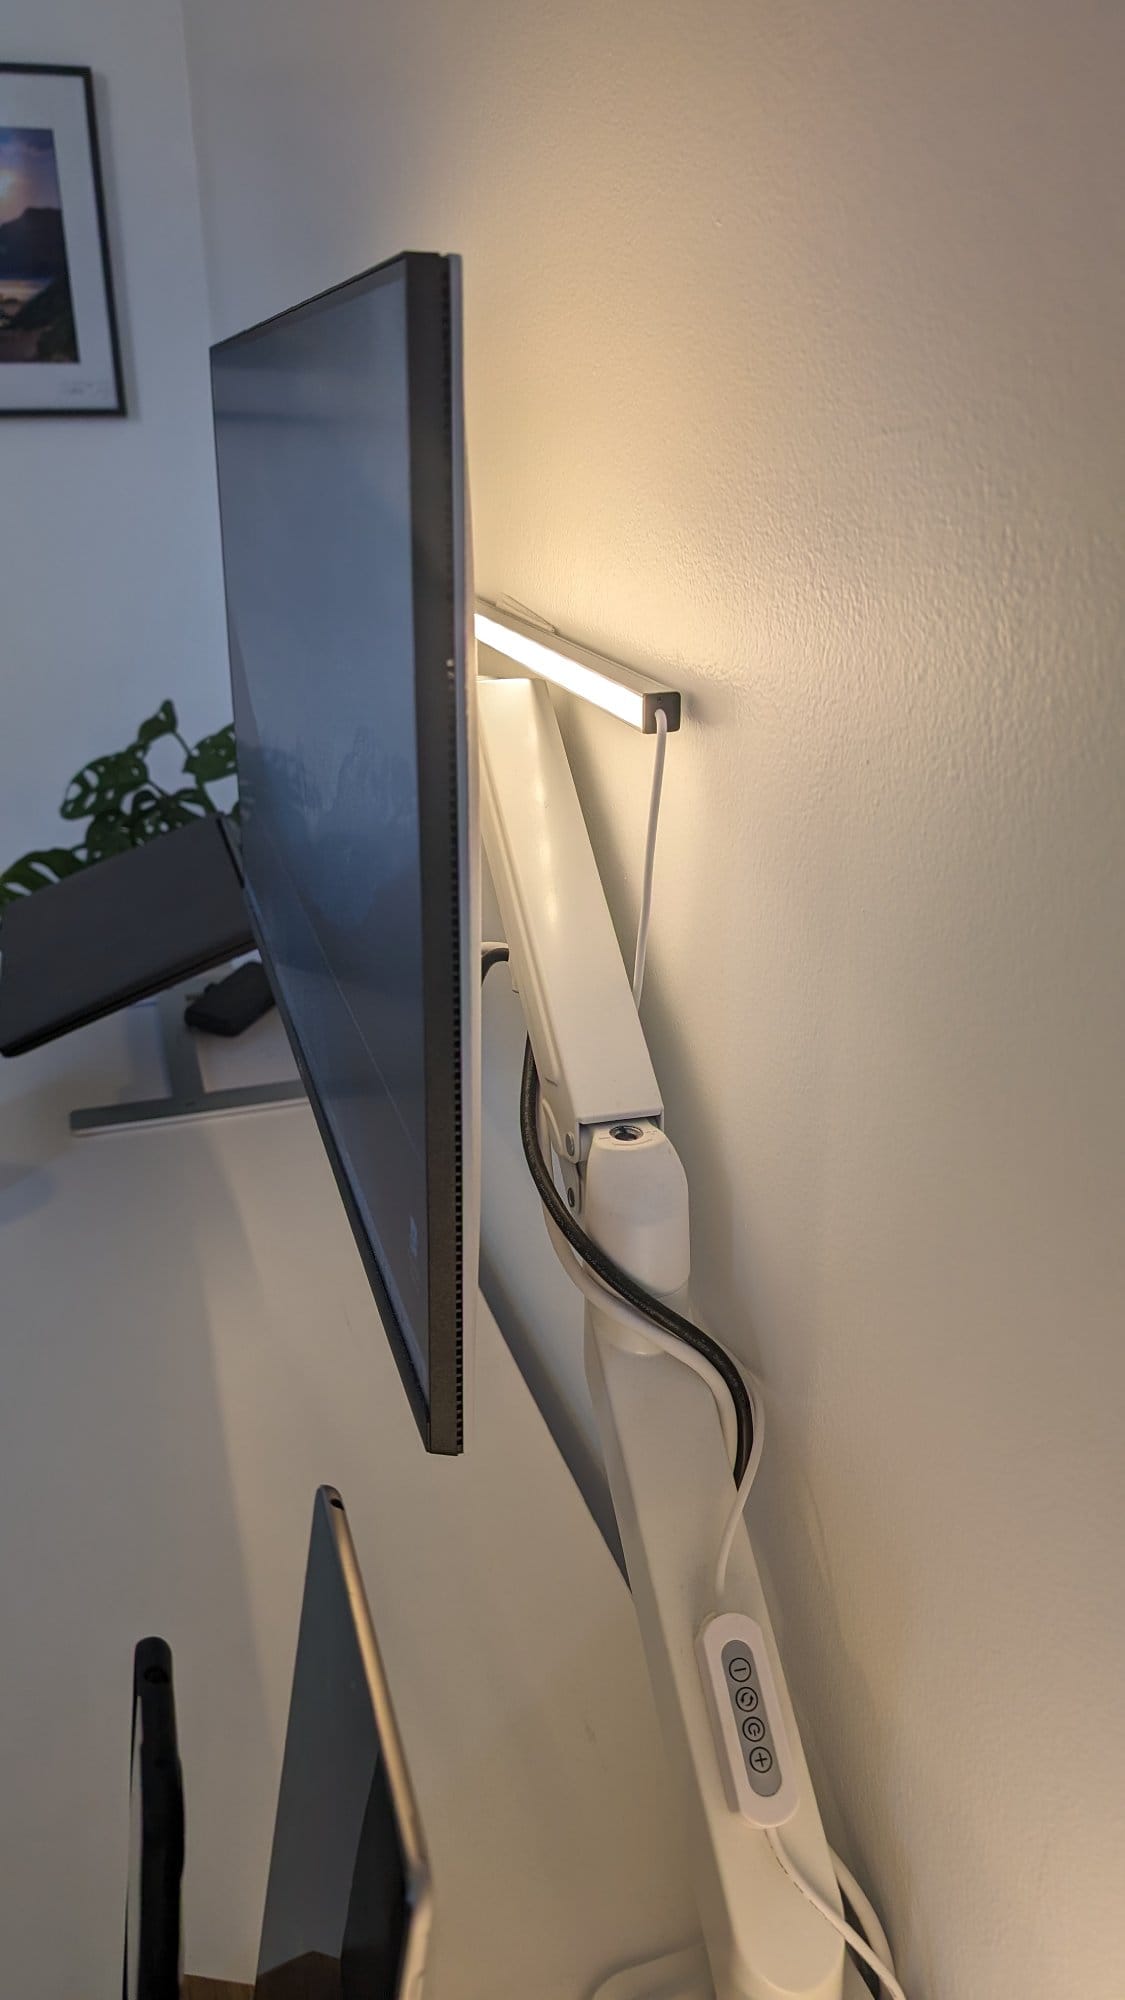 A side view of a thin monitor attached to a white articulated arm mount, with a power strip button visible, against a white wall, and a framed picture in the background